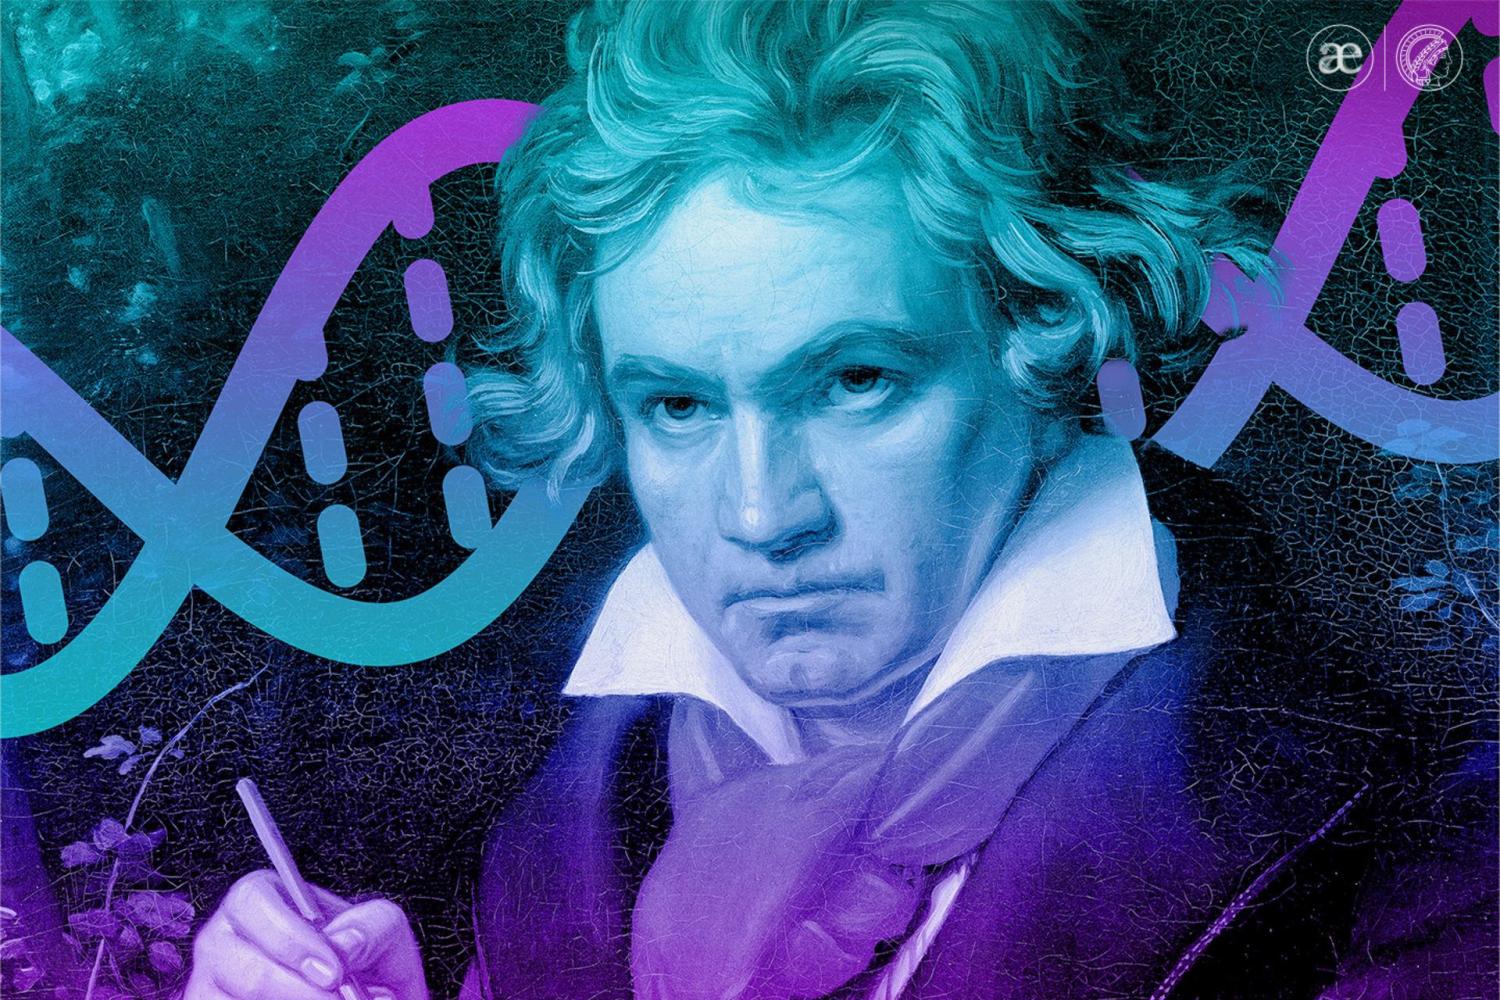 Beethoven’s DNA is not enough to explain his genius